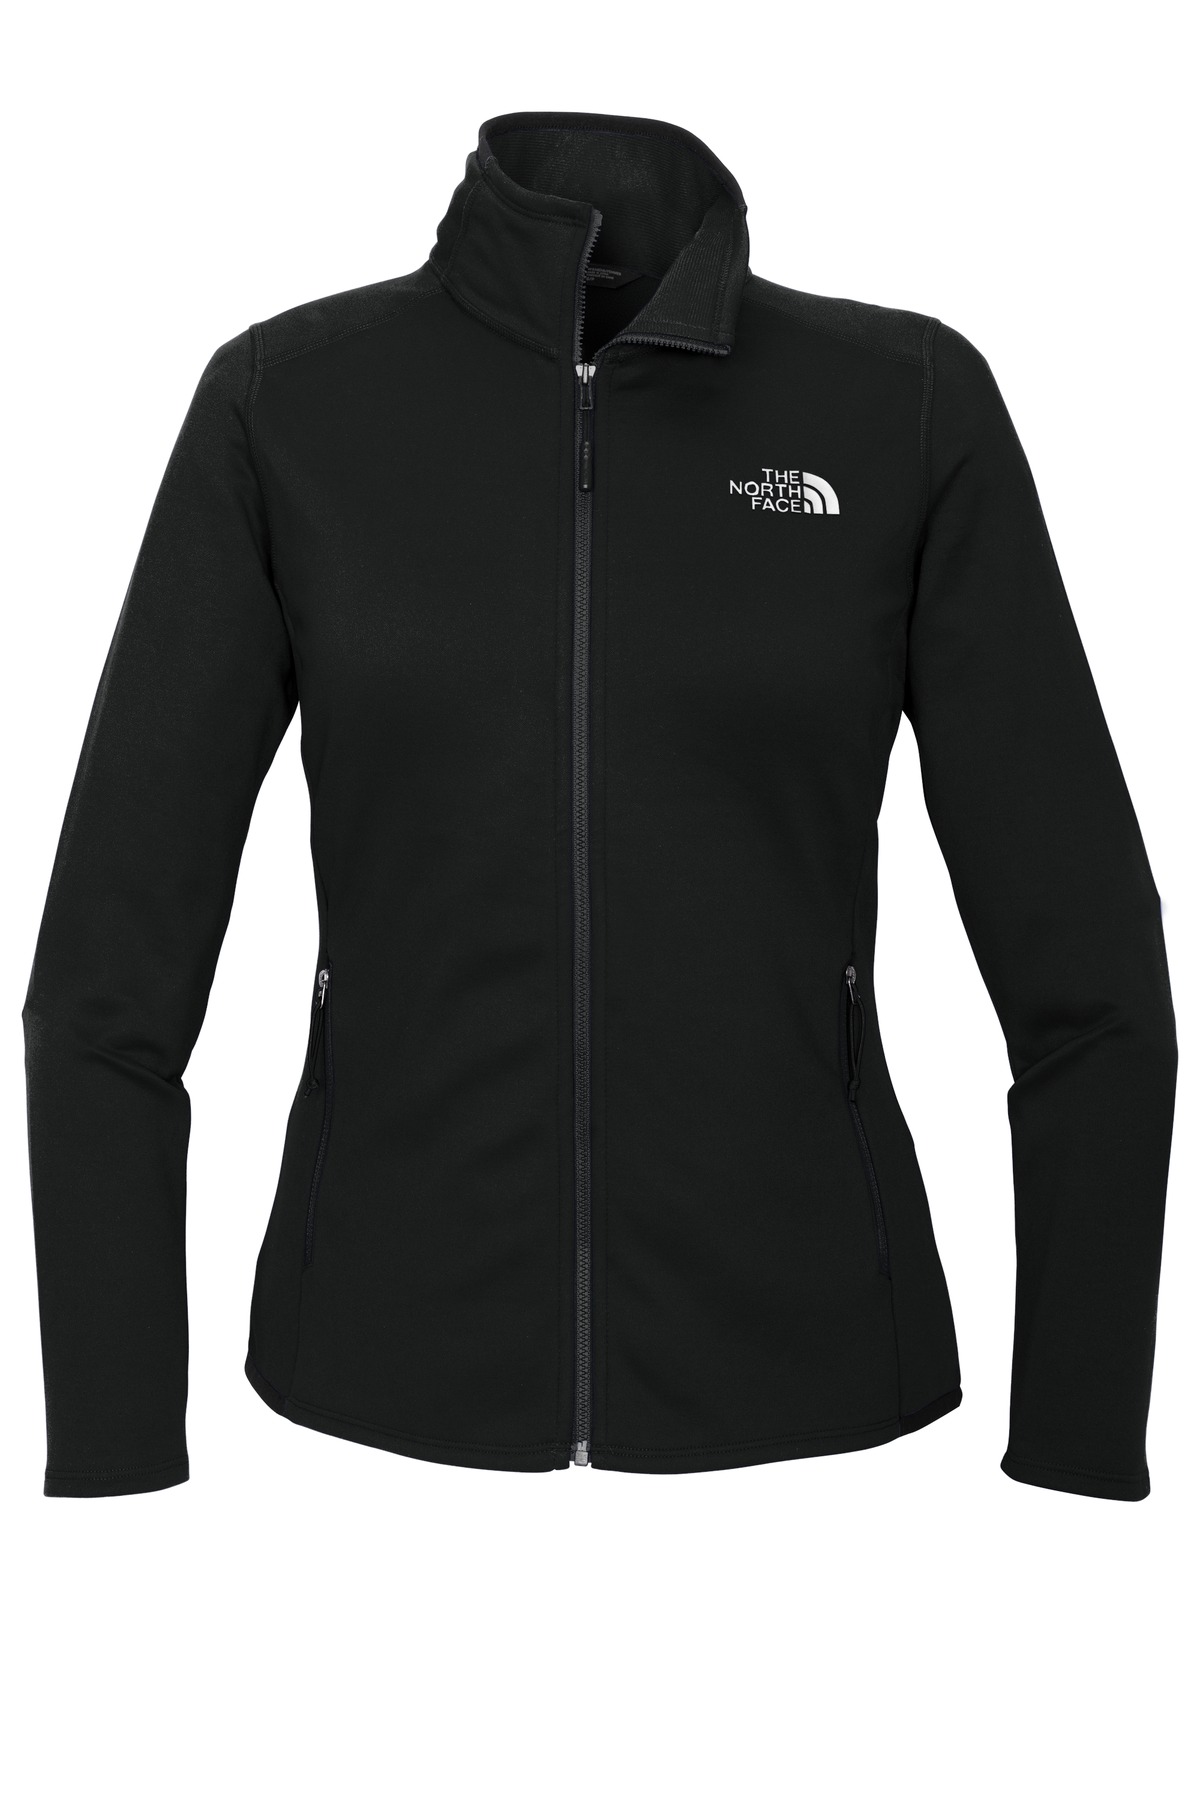 The North Face Ladies Skyline Full-Zip Fleece Jacket NF0A47F6 – in ...